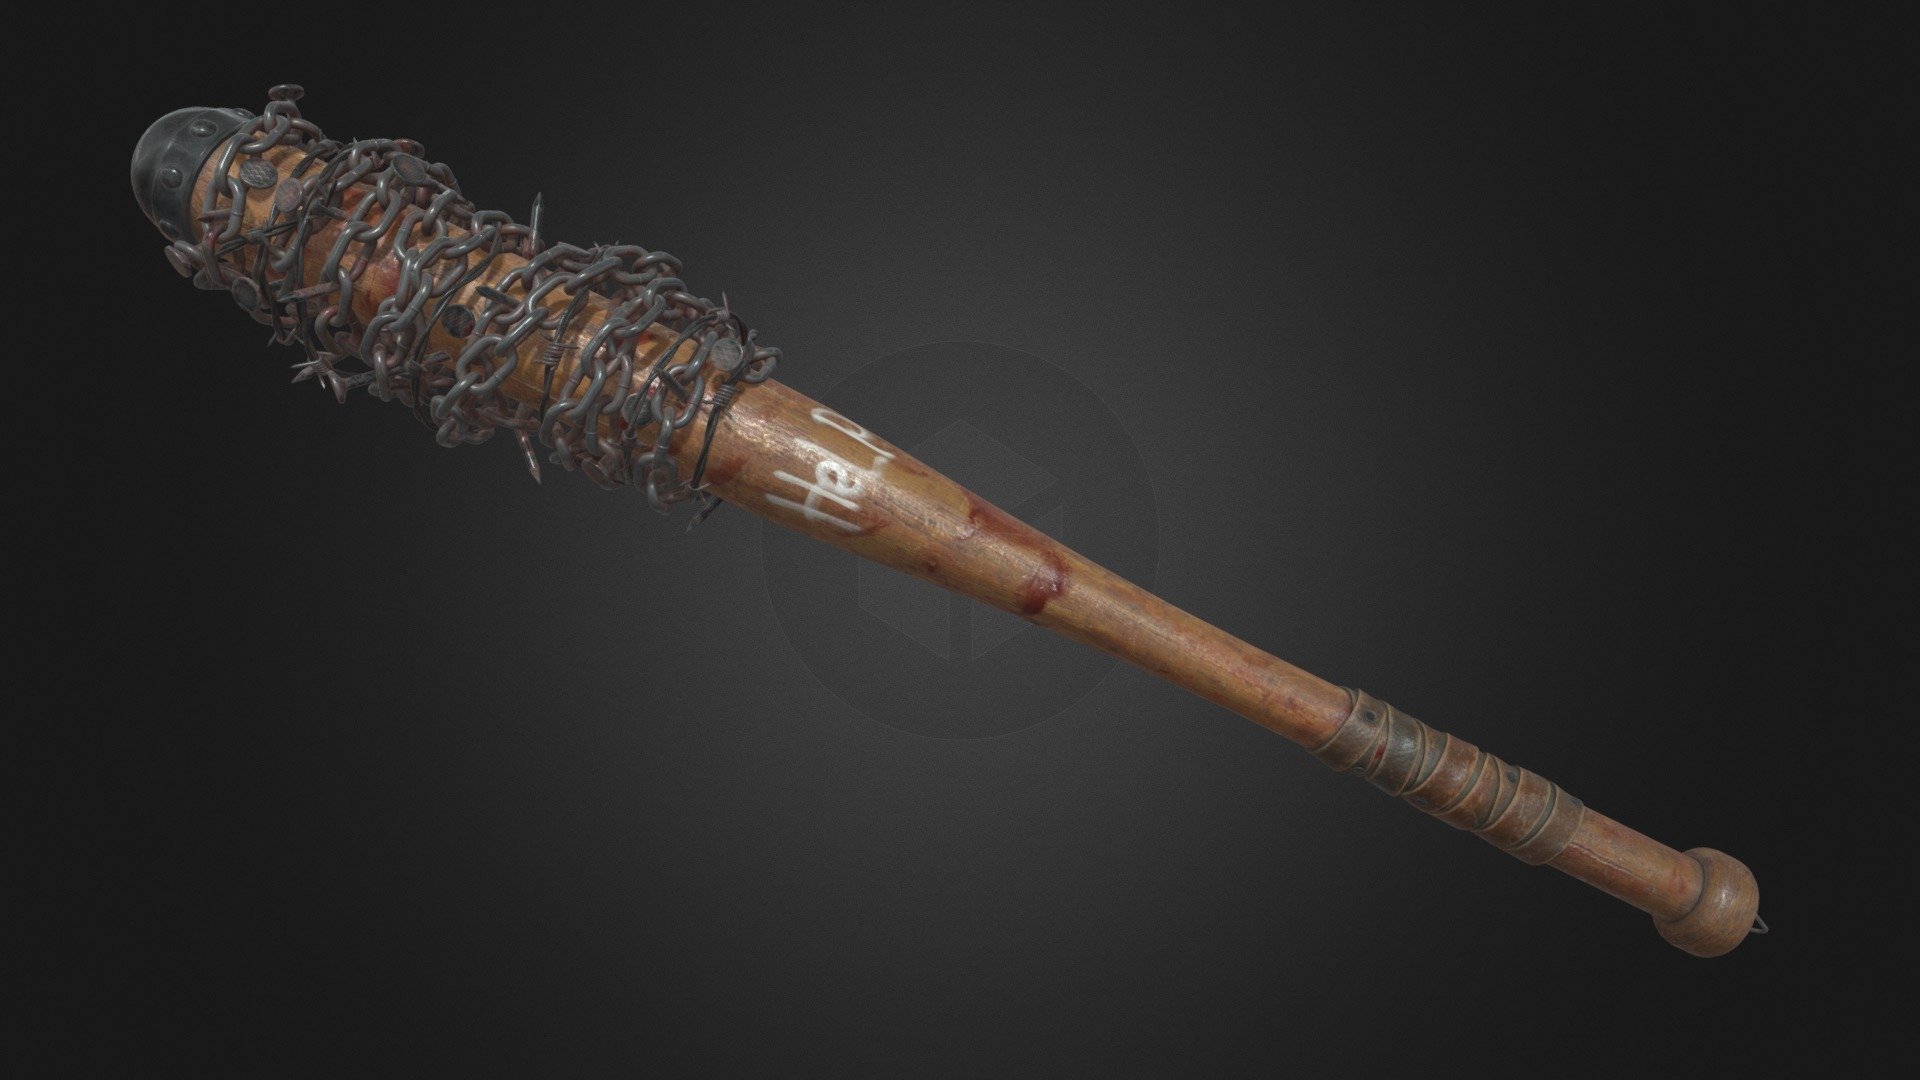 Baseball Bat Barbed Wires
This product is an optimized model with excellent texturing for realistic and faster rendering.

The model has an optimized low poly mesh with the greatest possible number of simplifications that do not affect photo-realism but can help to simplify it, thus lightening your scene and allowing for using this model in real-time 3d applications.

Real-world accurate model. Correctly scale modeled to represent precisely like in the real world.

In this product, all objects are ERROR-FREE. All LEGAL Geometry. Subdivisions are not required for this product.

Perfect for Architectural, Product visualization, Game Engine, and VR (Virtual Reality) No Plugin Needed.

Format Type




3ds Max 2017 (with physical PBR Shader)

FBX

OBJ

3DS
 - Baseball Bat Barbed Wires - Buy Royalty Free 3D model by luxe3dworld 3d model